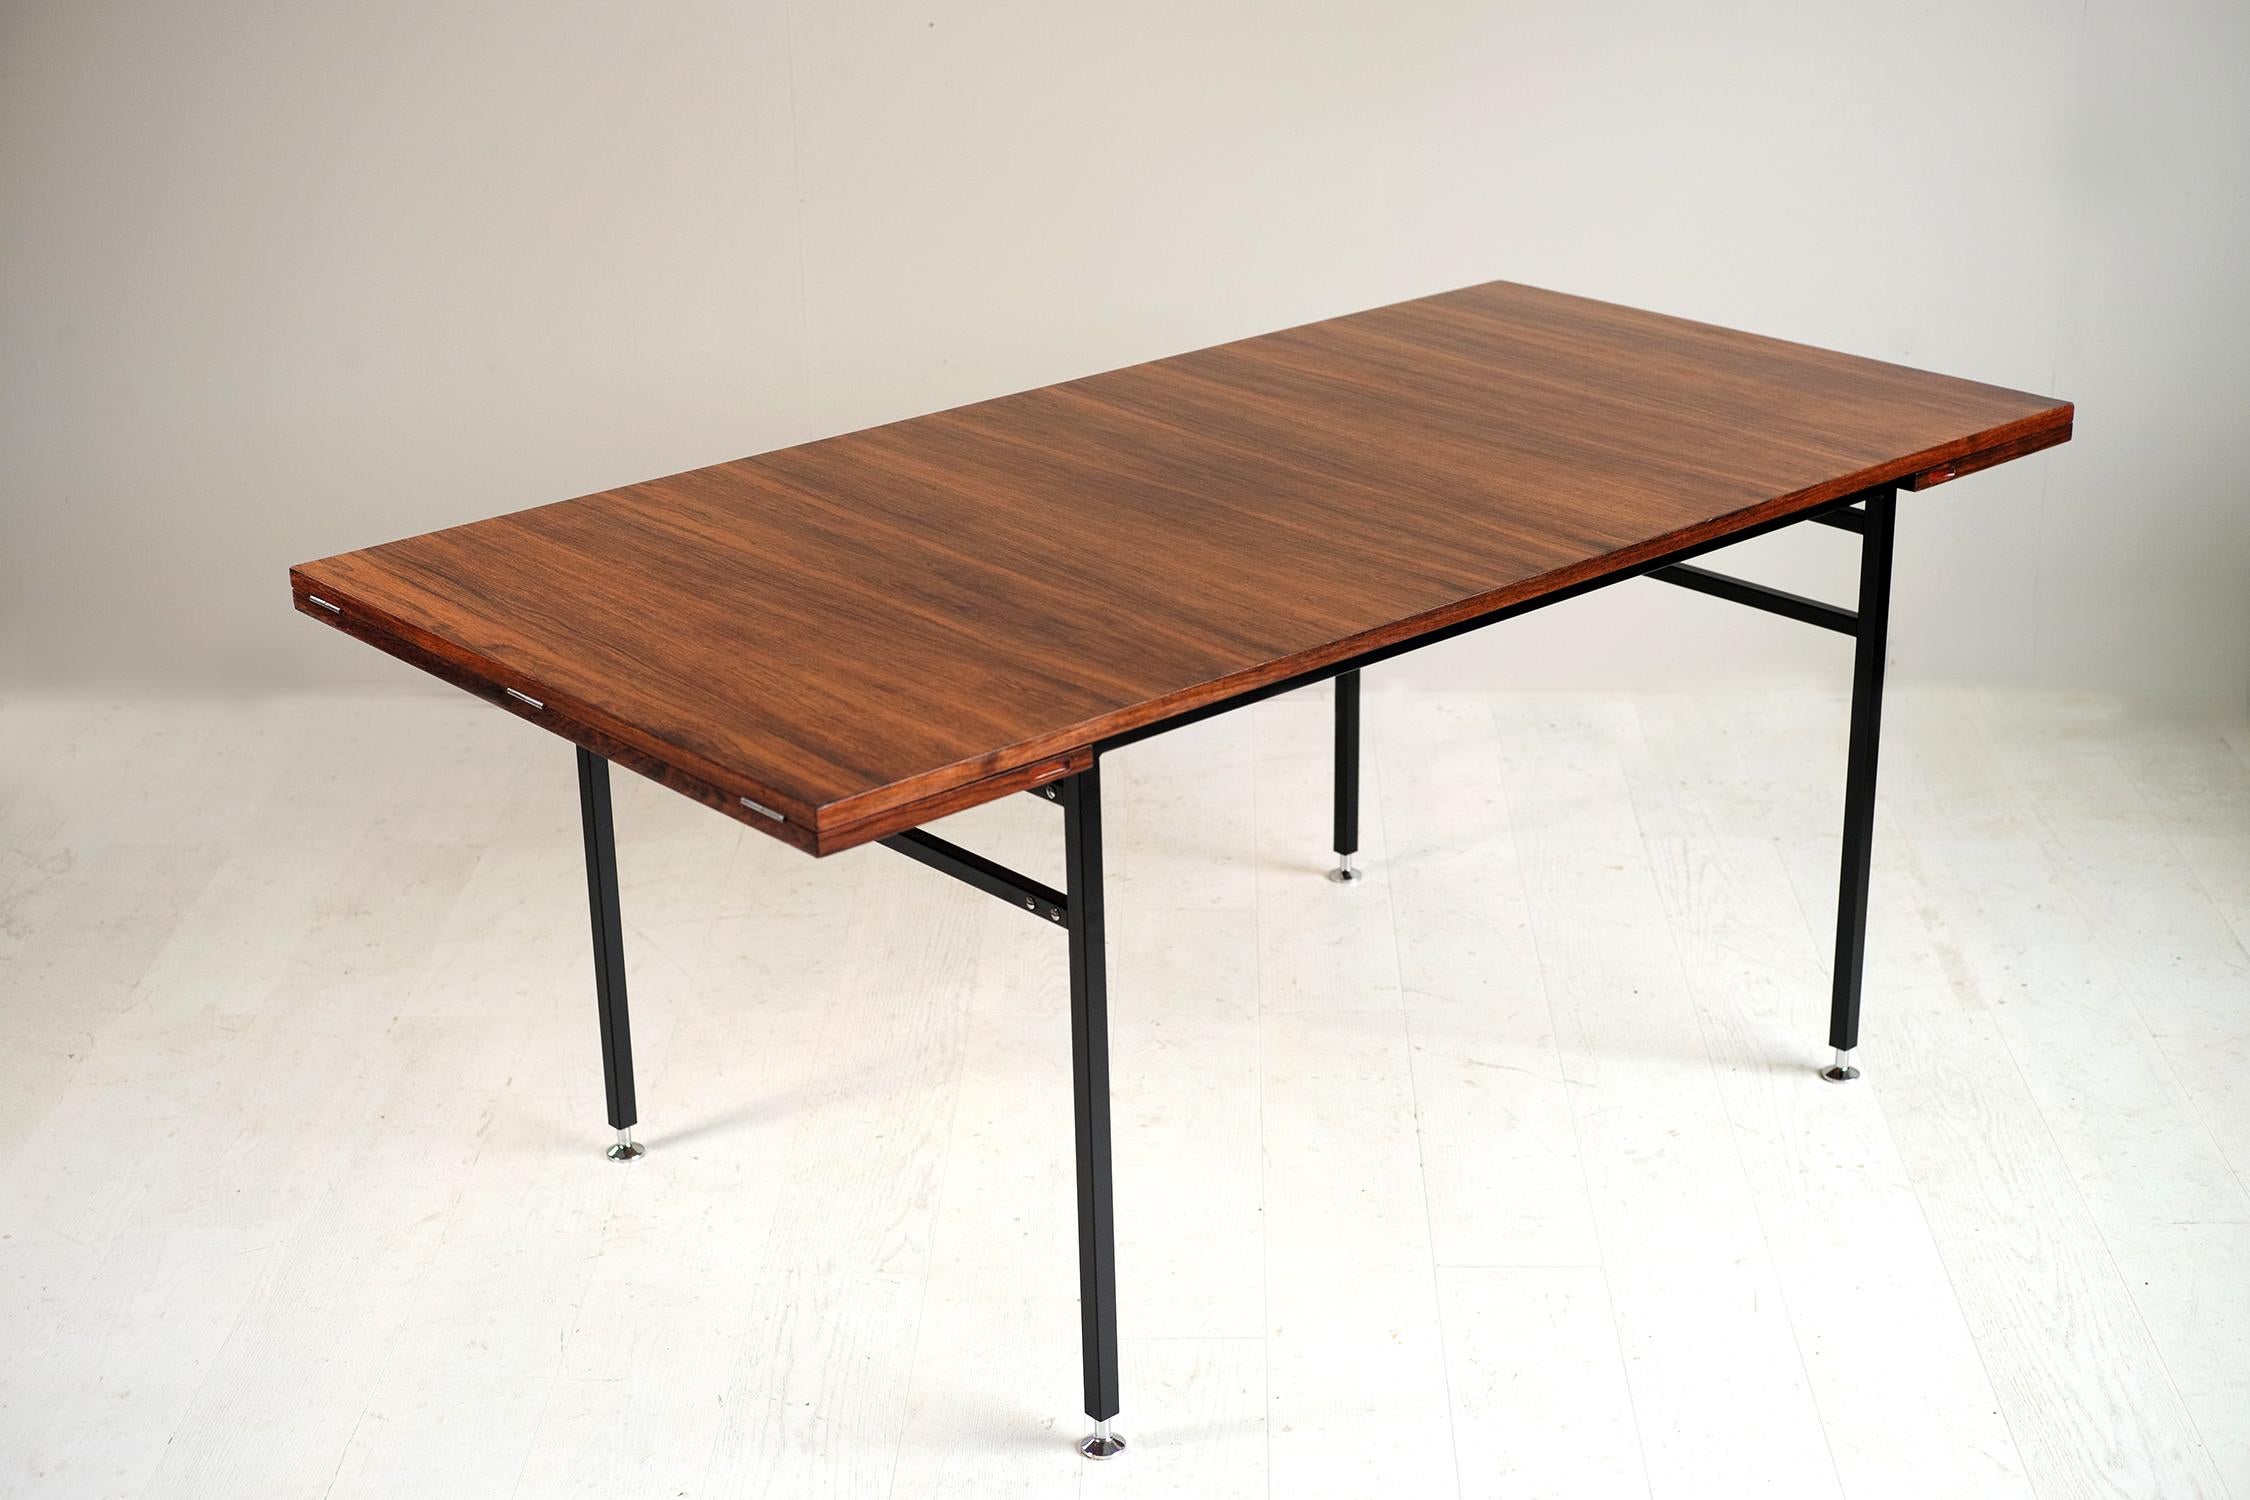 Alain Richard, Rosewood Table, 800 Series, France, 1960 In Good Condition For Sale In Catonvielle, FR